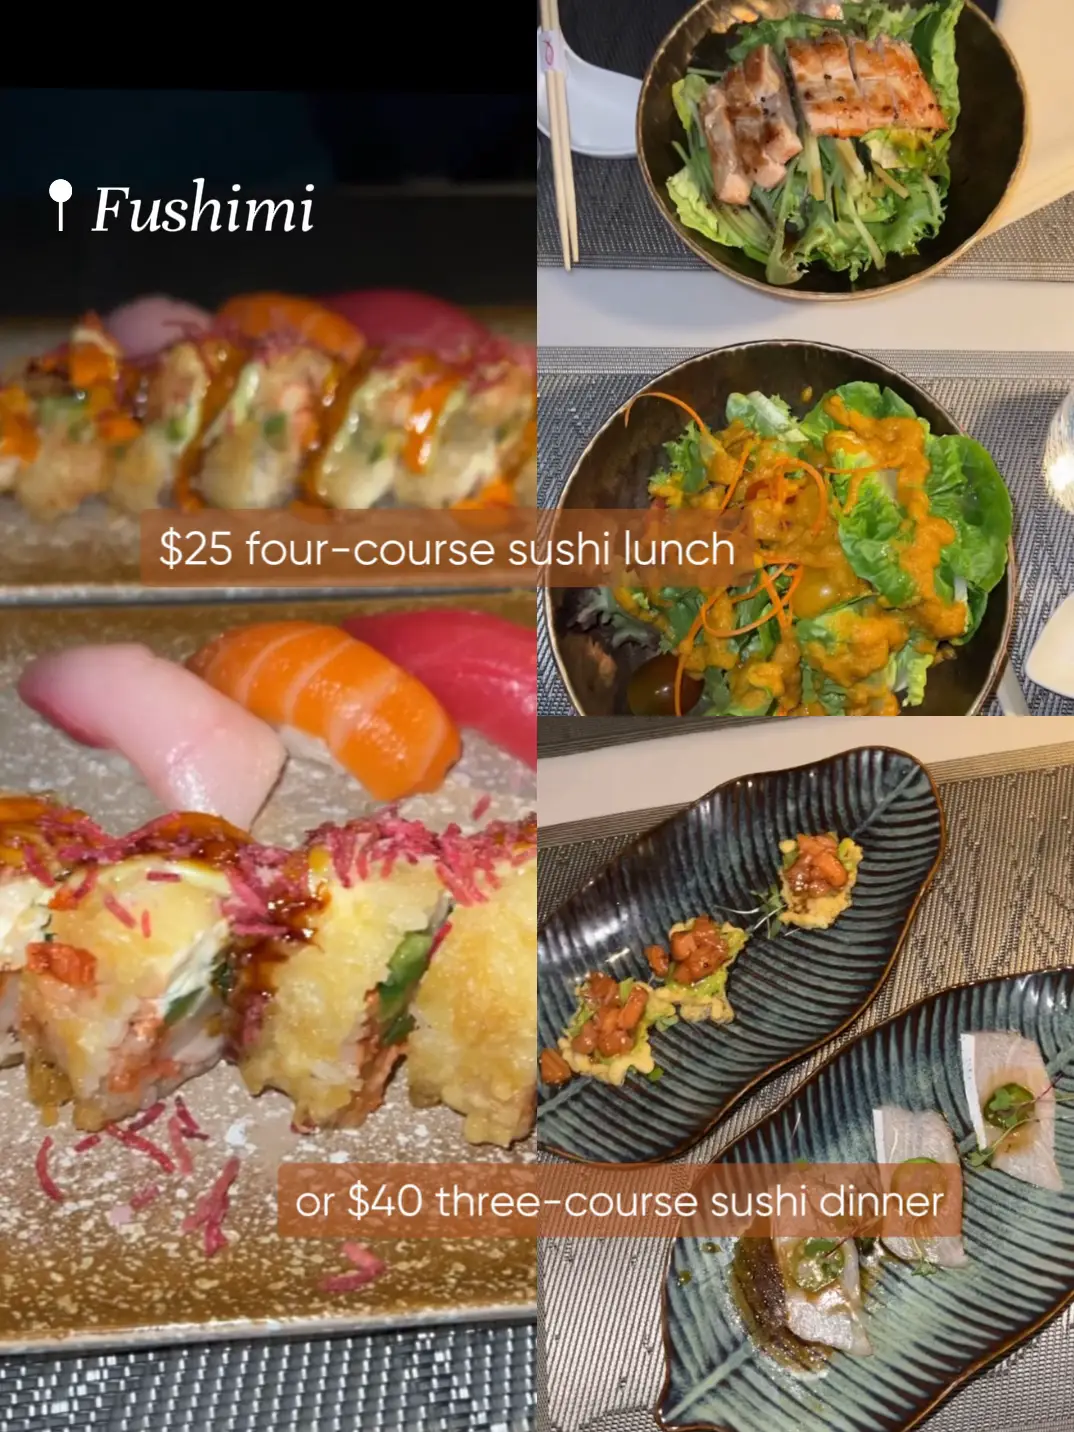  A collage of sushi pictures with the words "Fushimi" and the price of the meal.